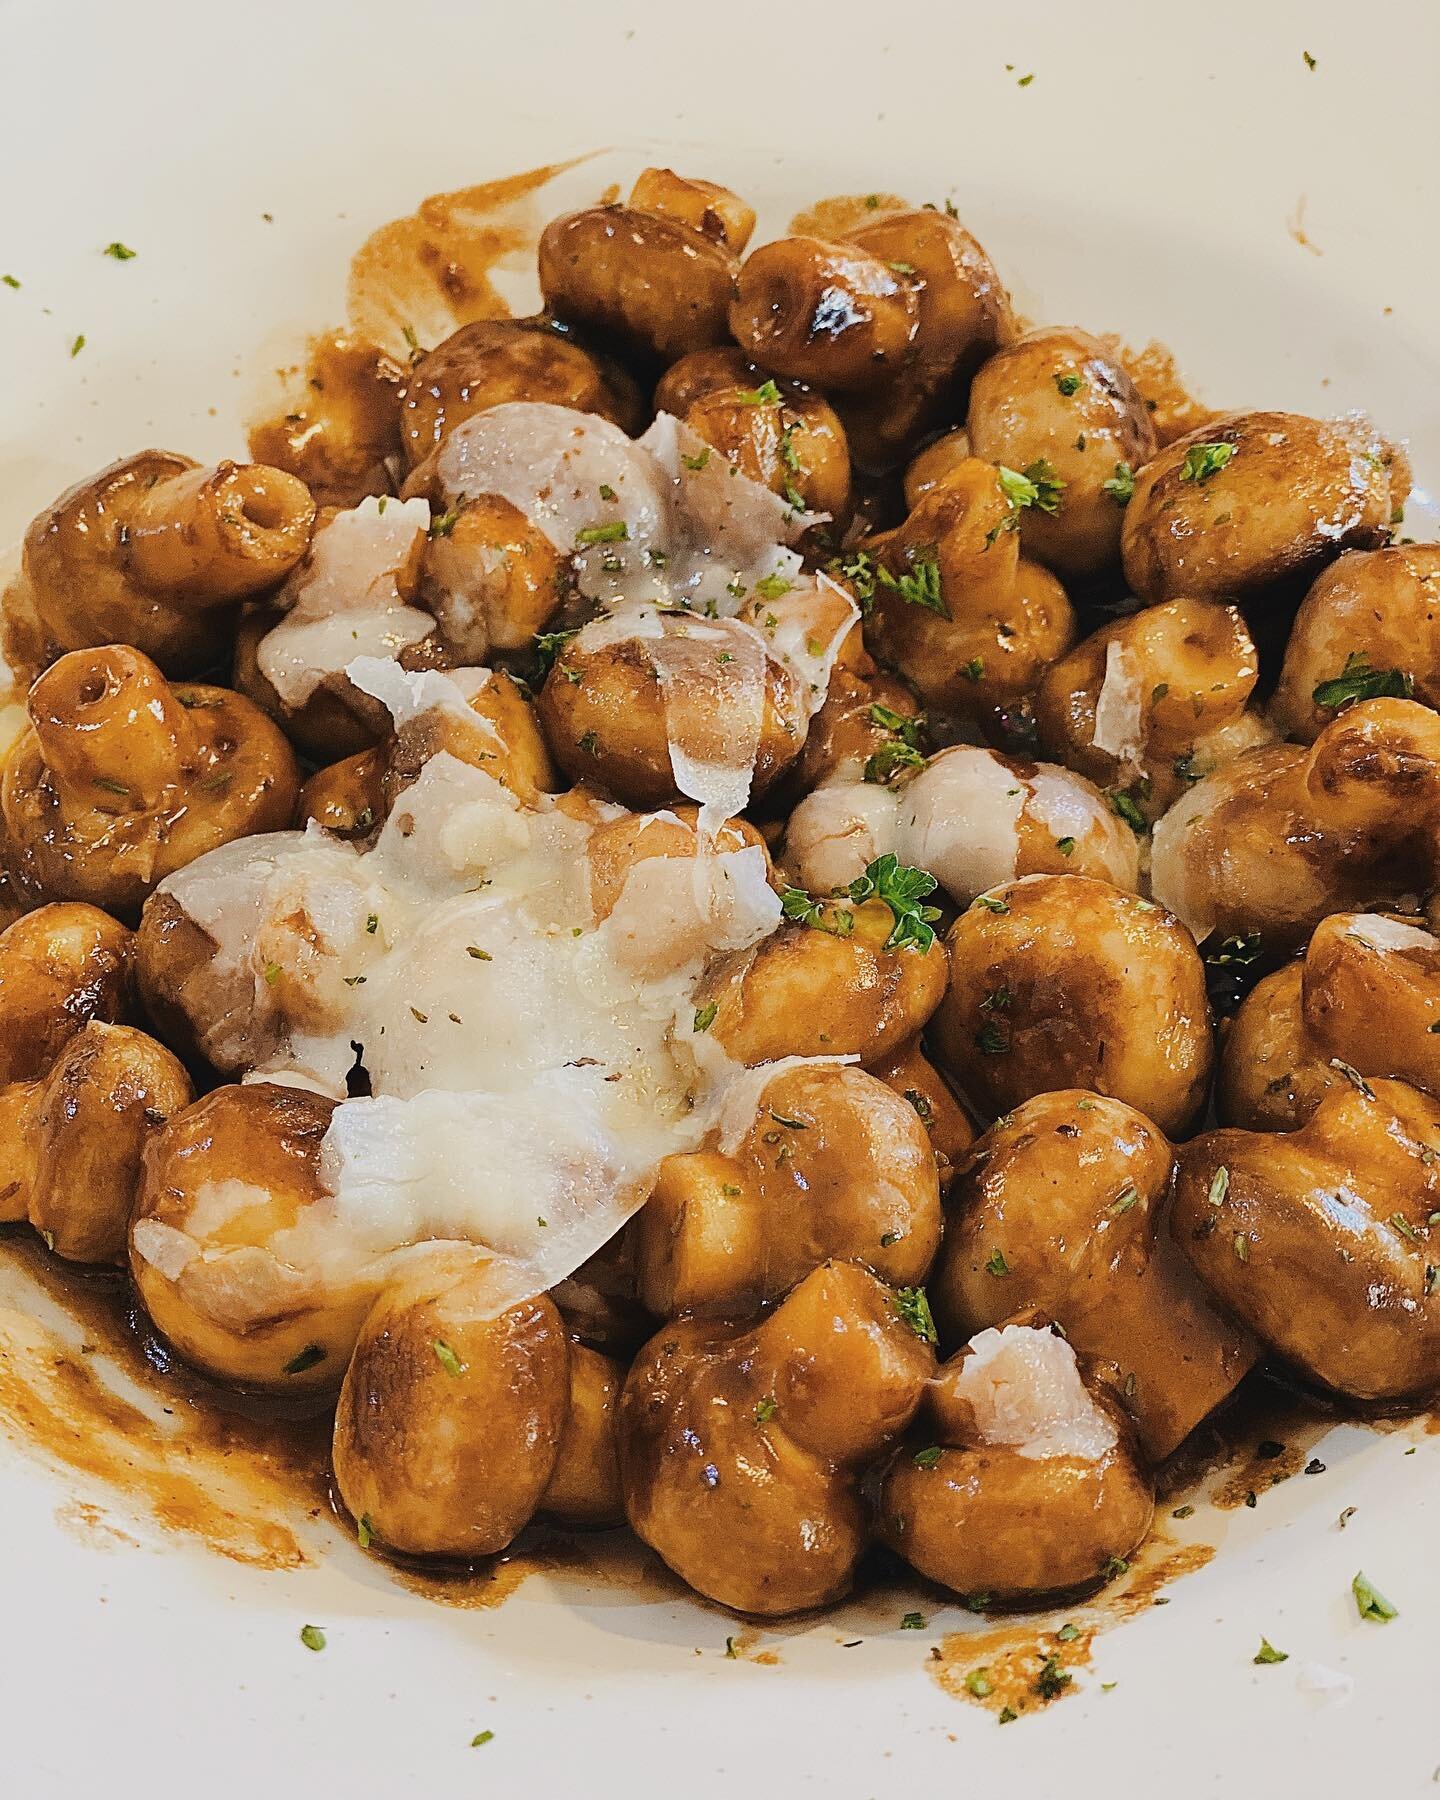 Just in case you needed even more of a reason to come see us for dinner tonight... 😉

Say hello to our saut&eacute;ed mushrooms! Button mushrooms simmered with fresh thyme in sherry wine and demi glaze sauce and topped with Parmesan cheese... and th